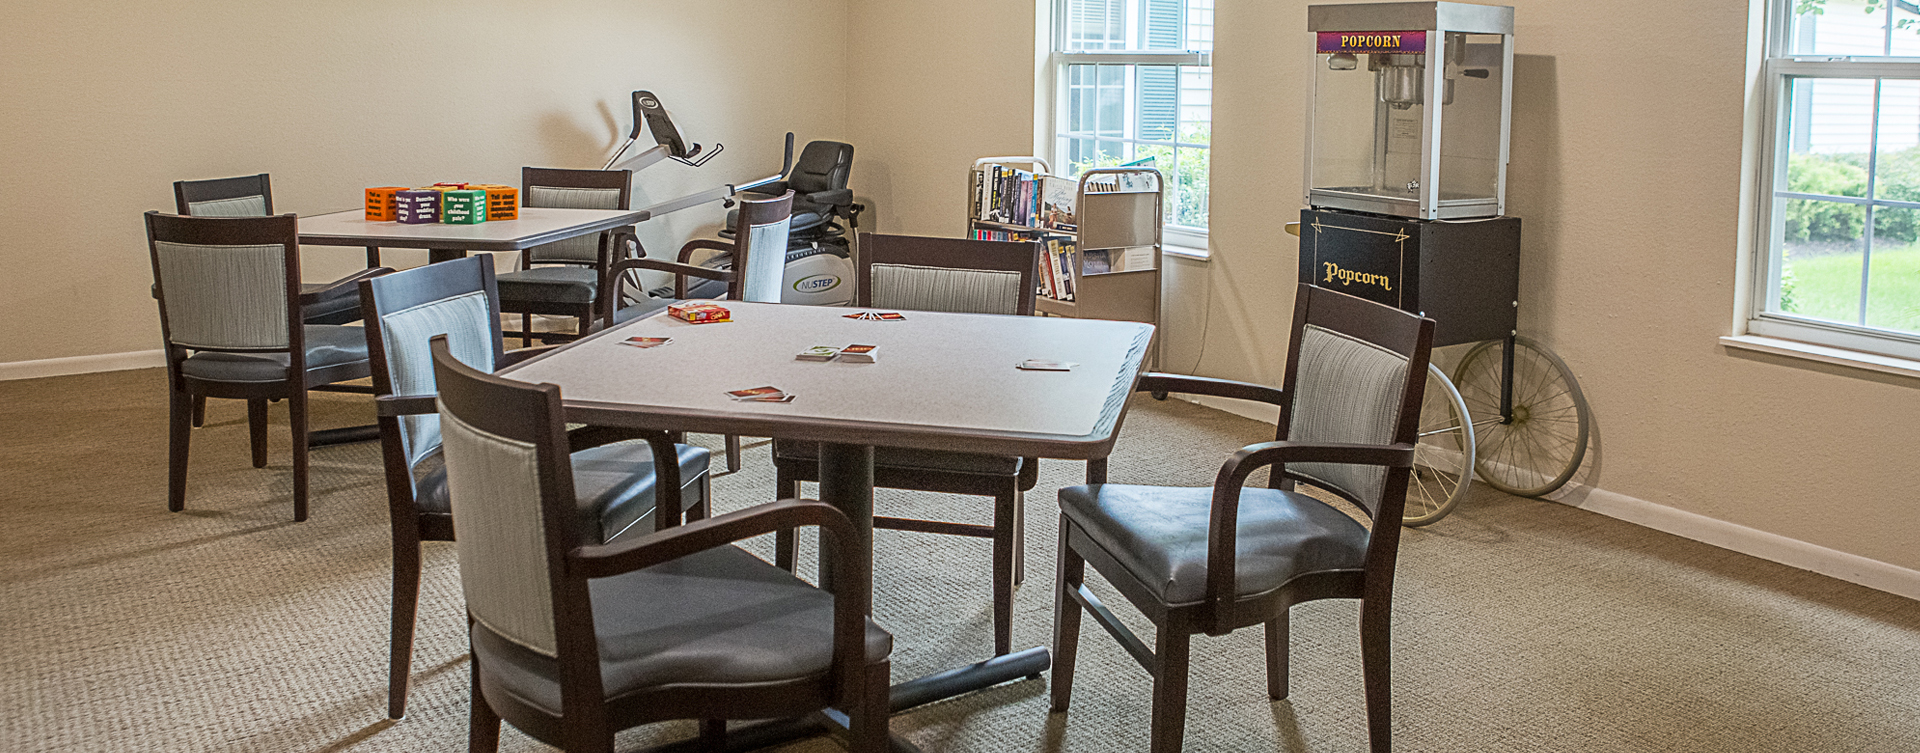 Enjoy a good card game with friends in the activity room at Bickford of Clinton